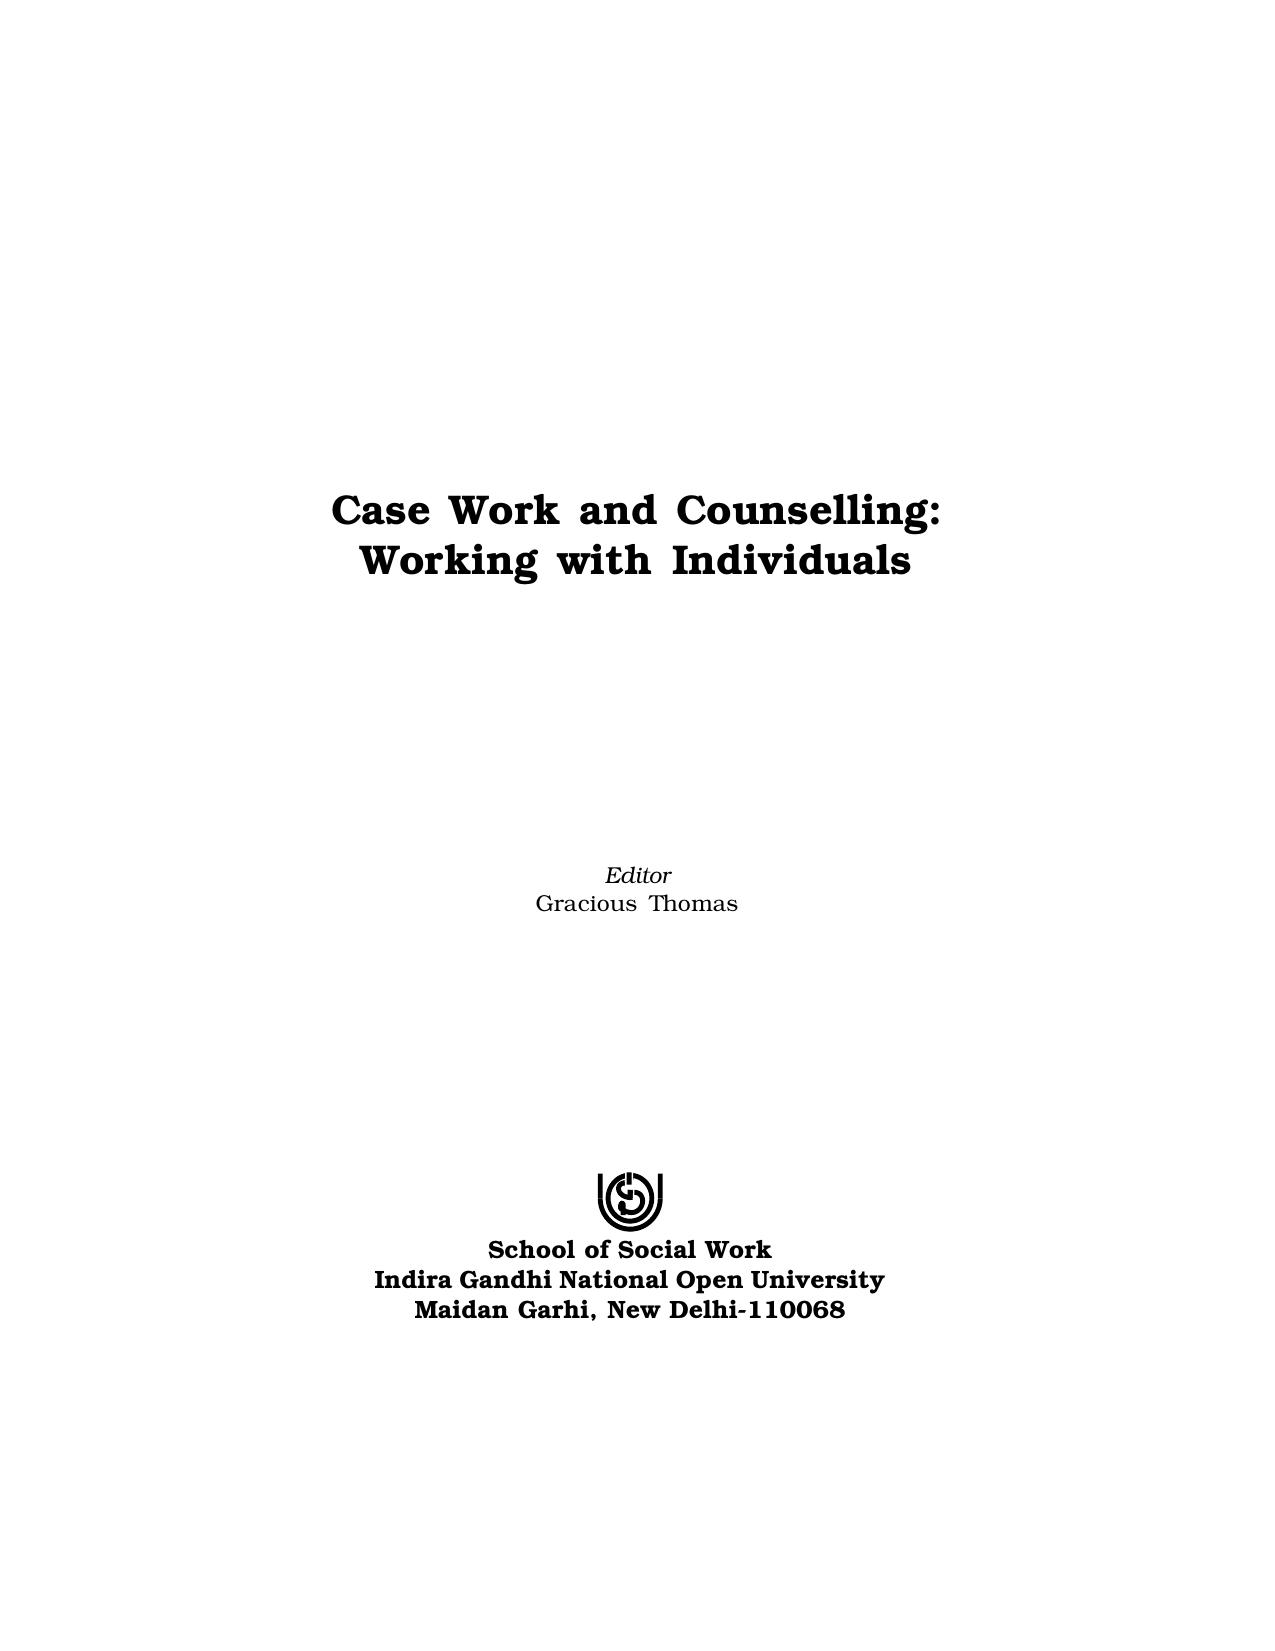 Case Work and Counselling 2010